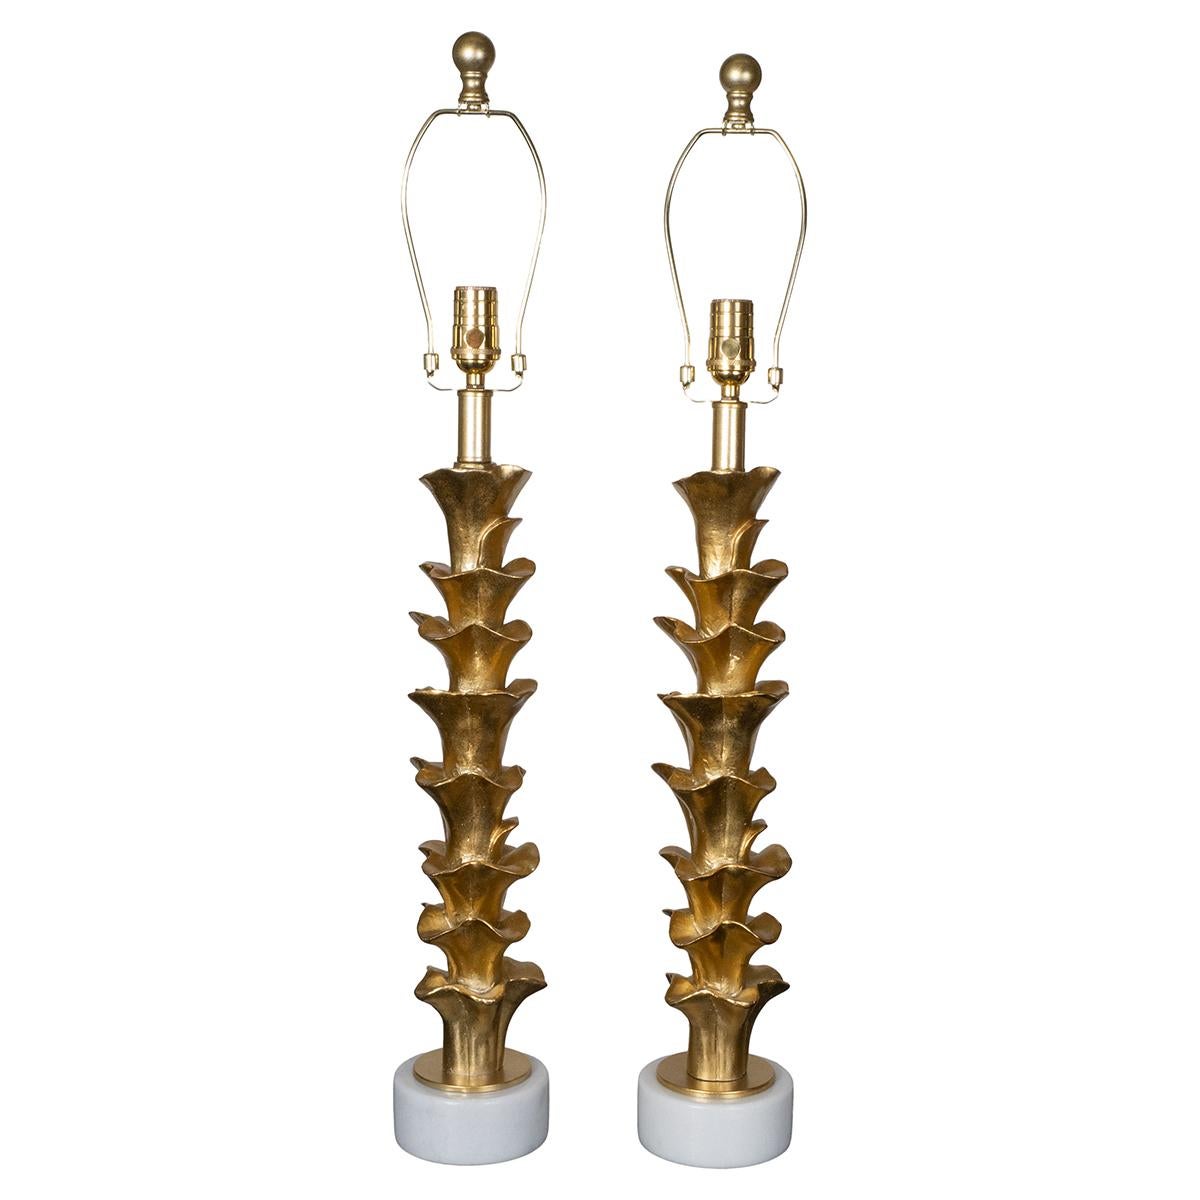 Pair of organic form composition table lamps on stone bases with golden gilt-like finish.